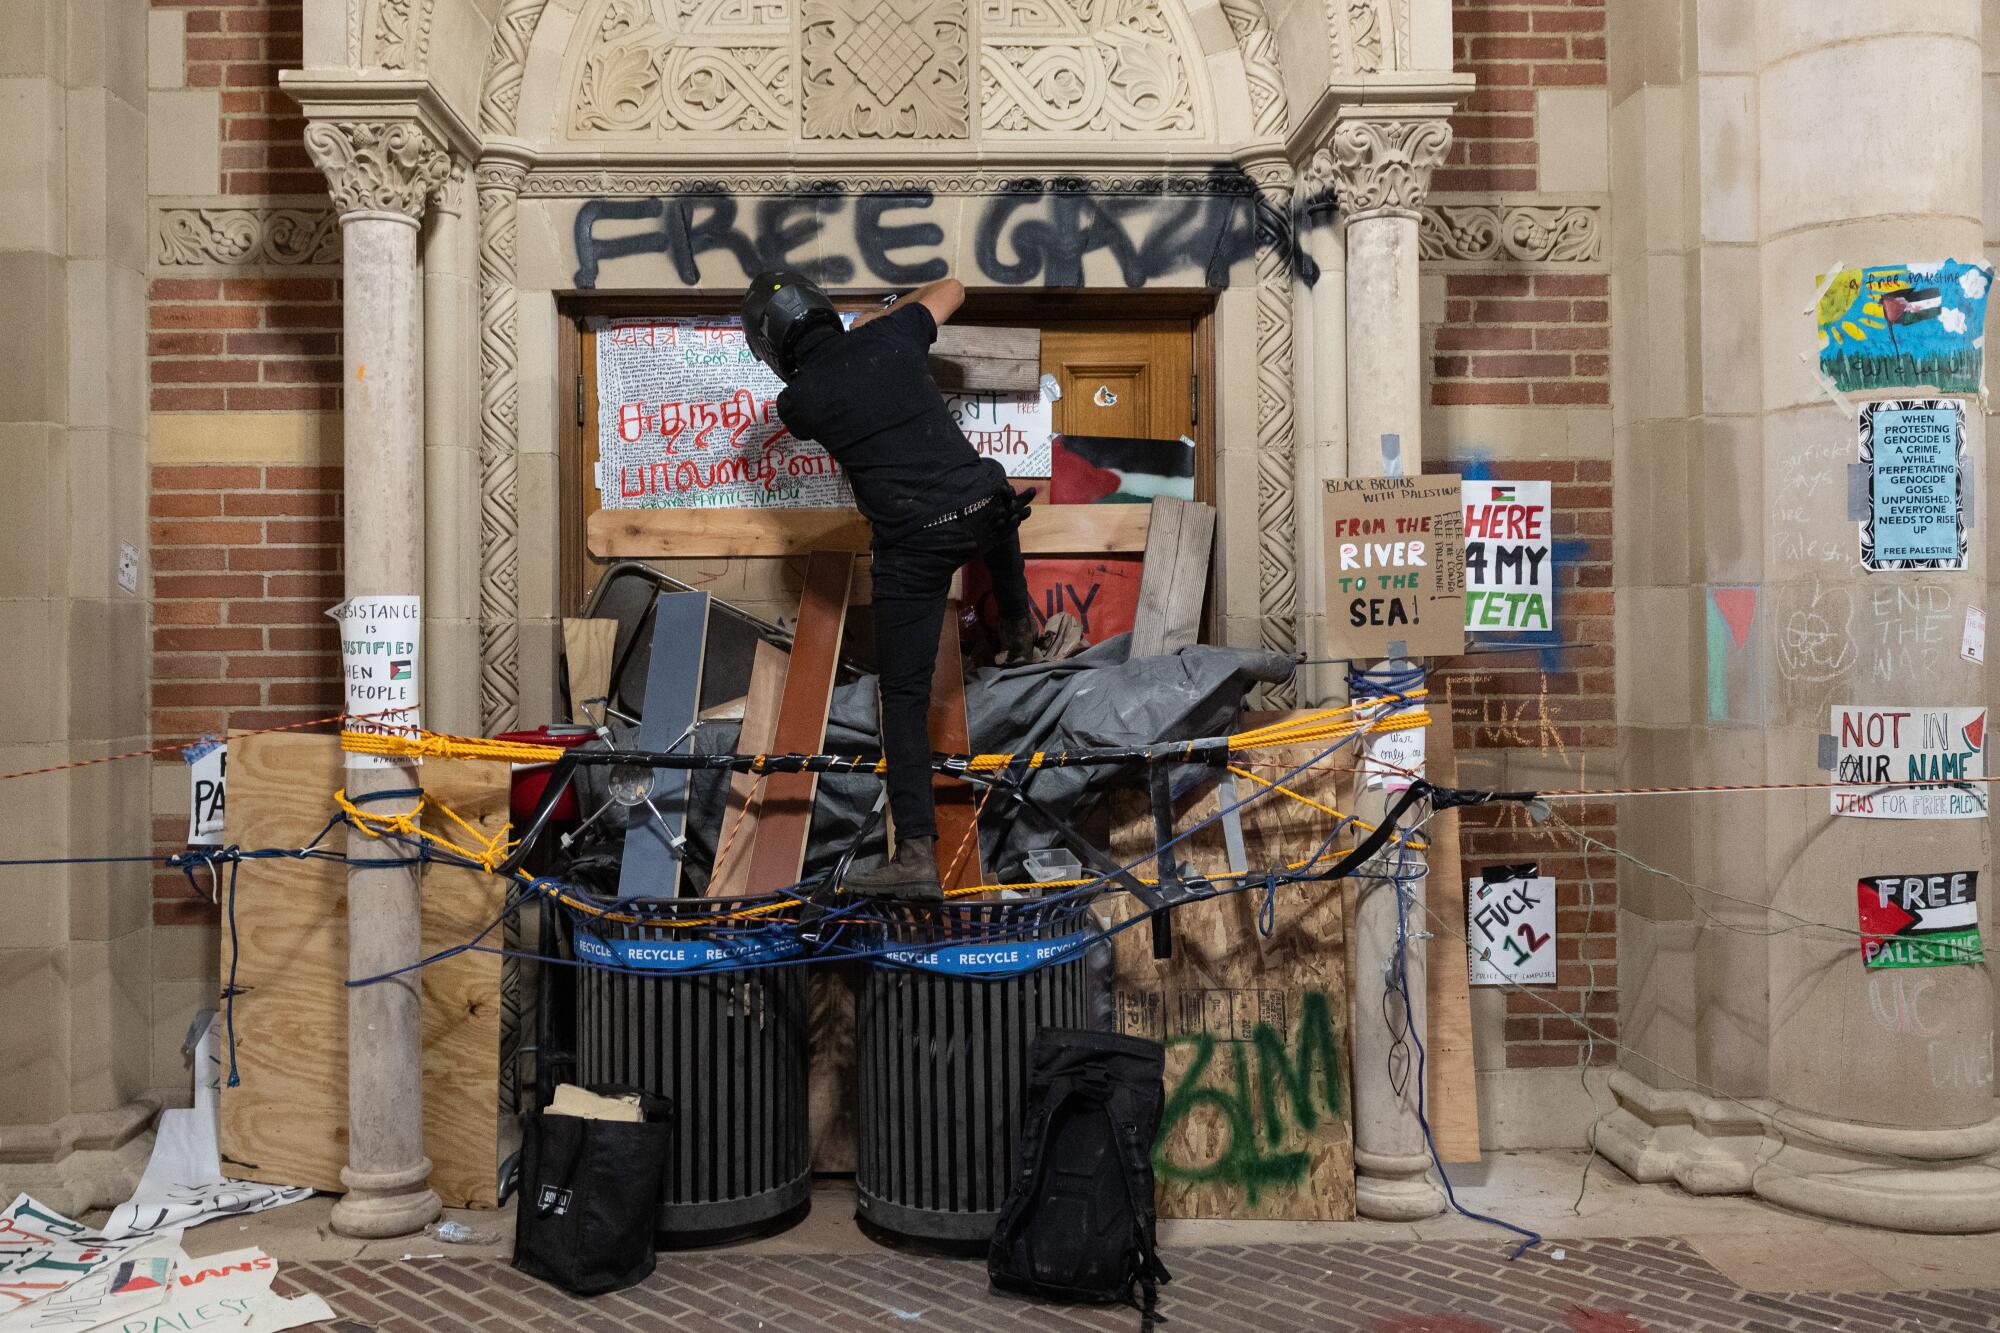 A person climbs some stuff under graffiti that says "Free Gaza."